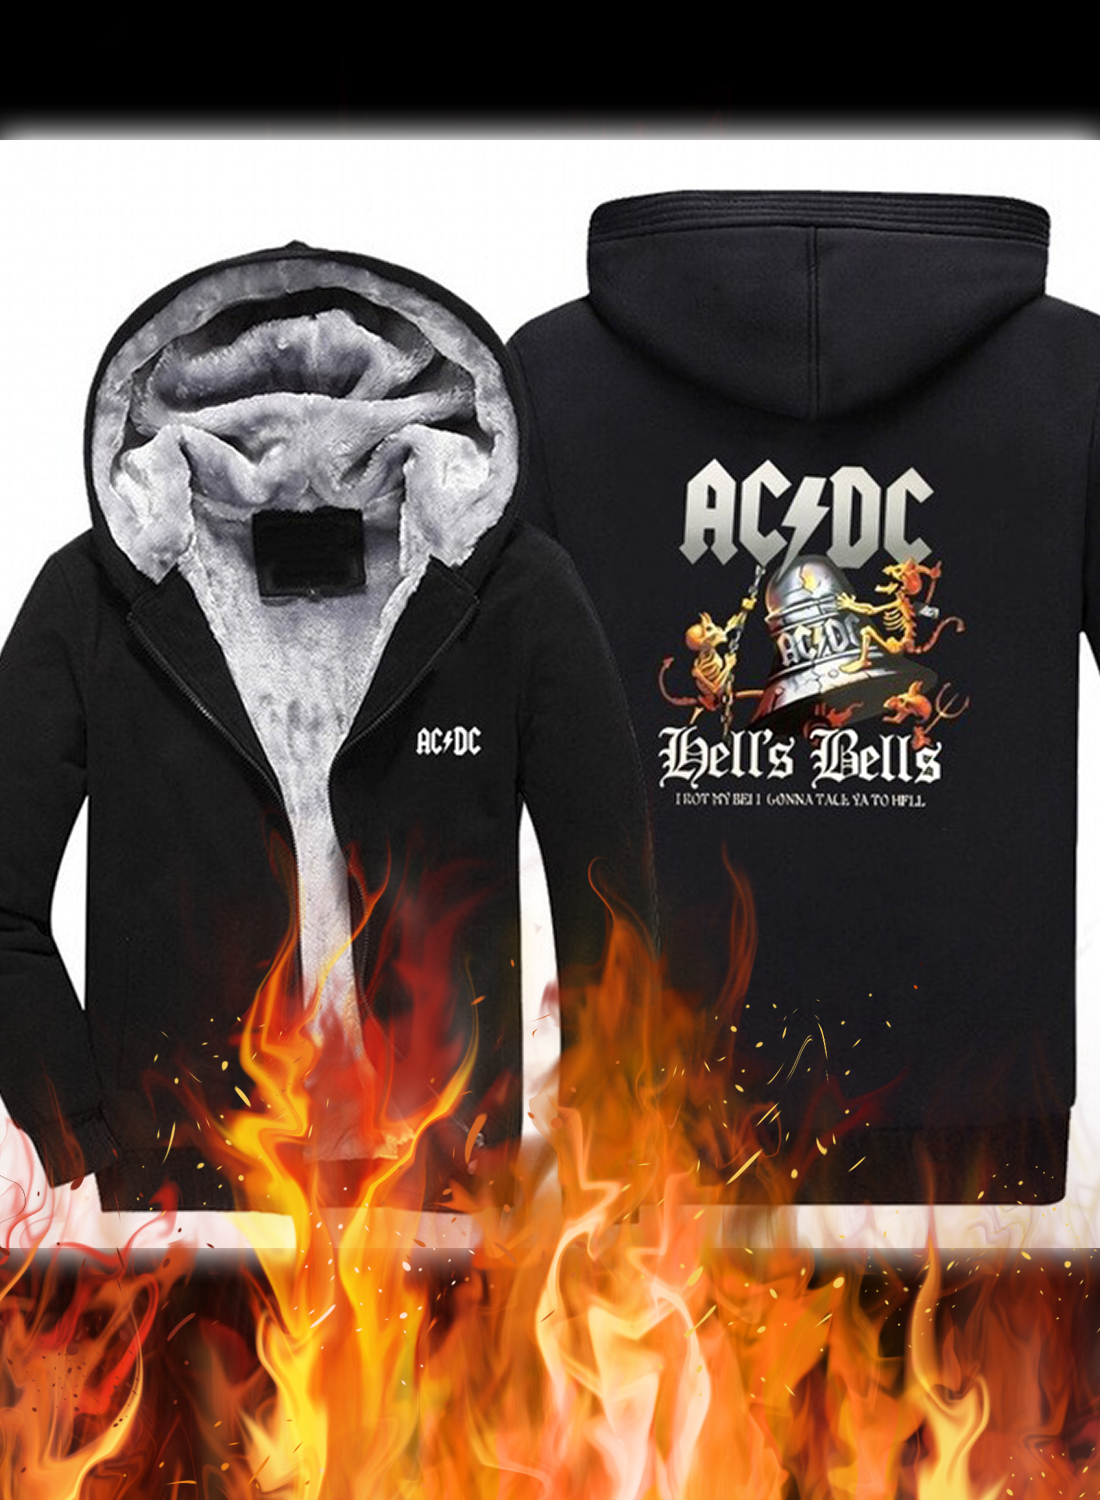 ACDC Bell Skull I Got My Bell Gonna Take Ya To Hell Fleece Hoodie 2